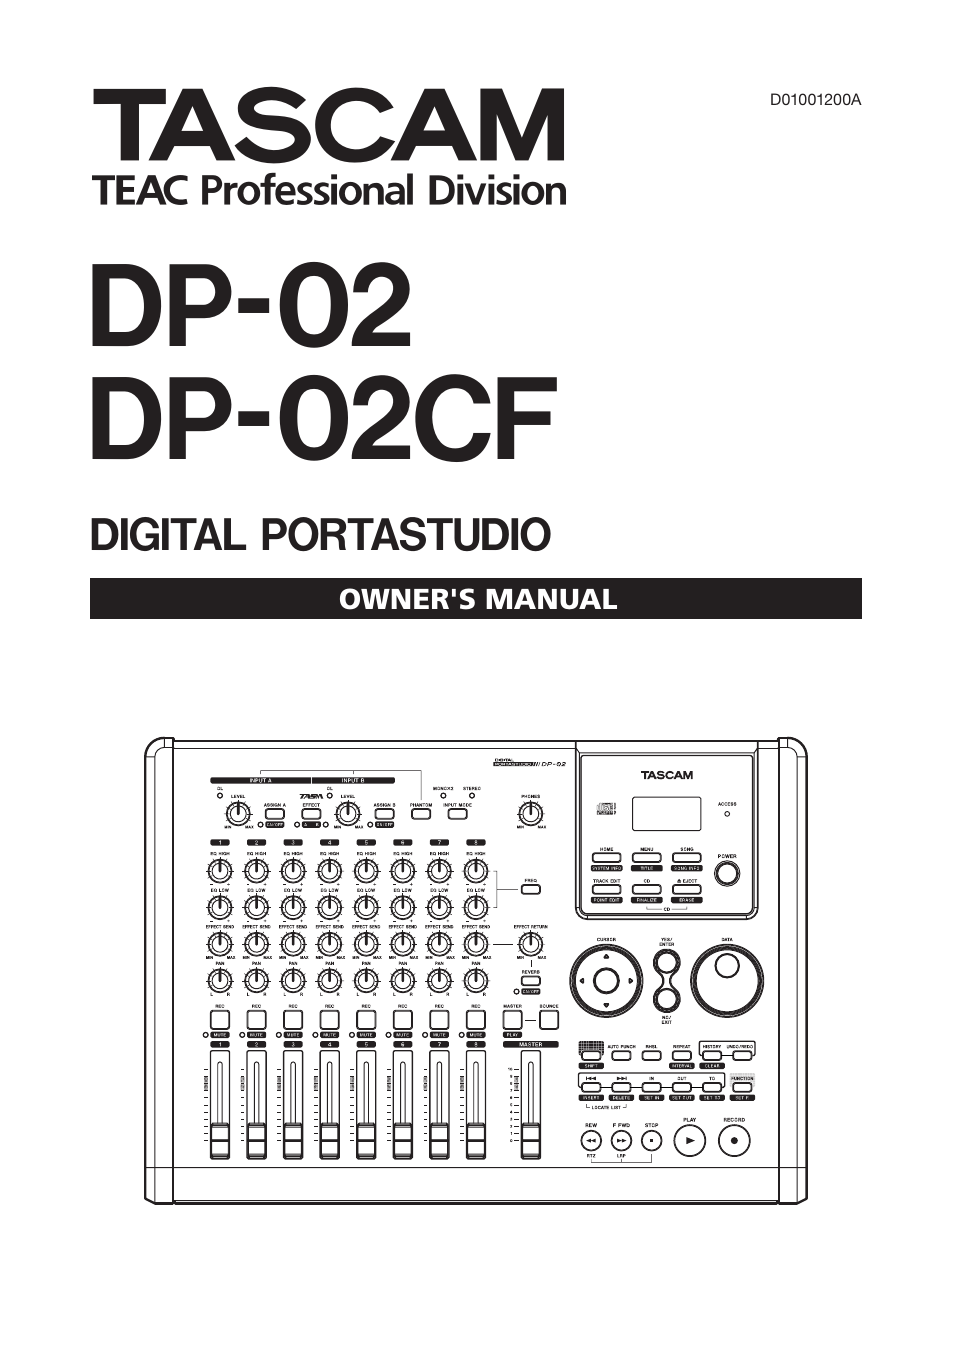 Tascam DP-02 User Manual | 80 pages | Also for: DP-02CF